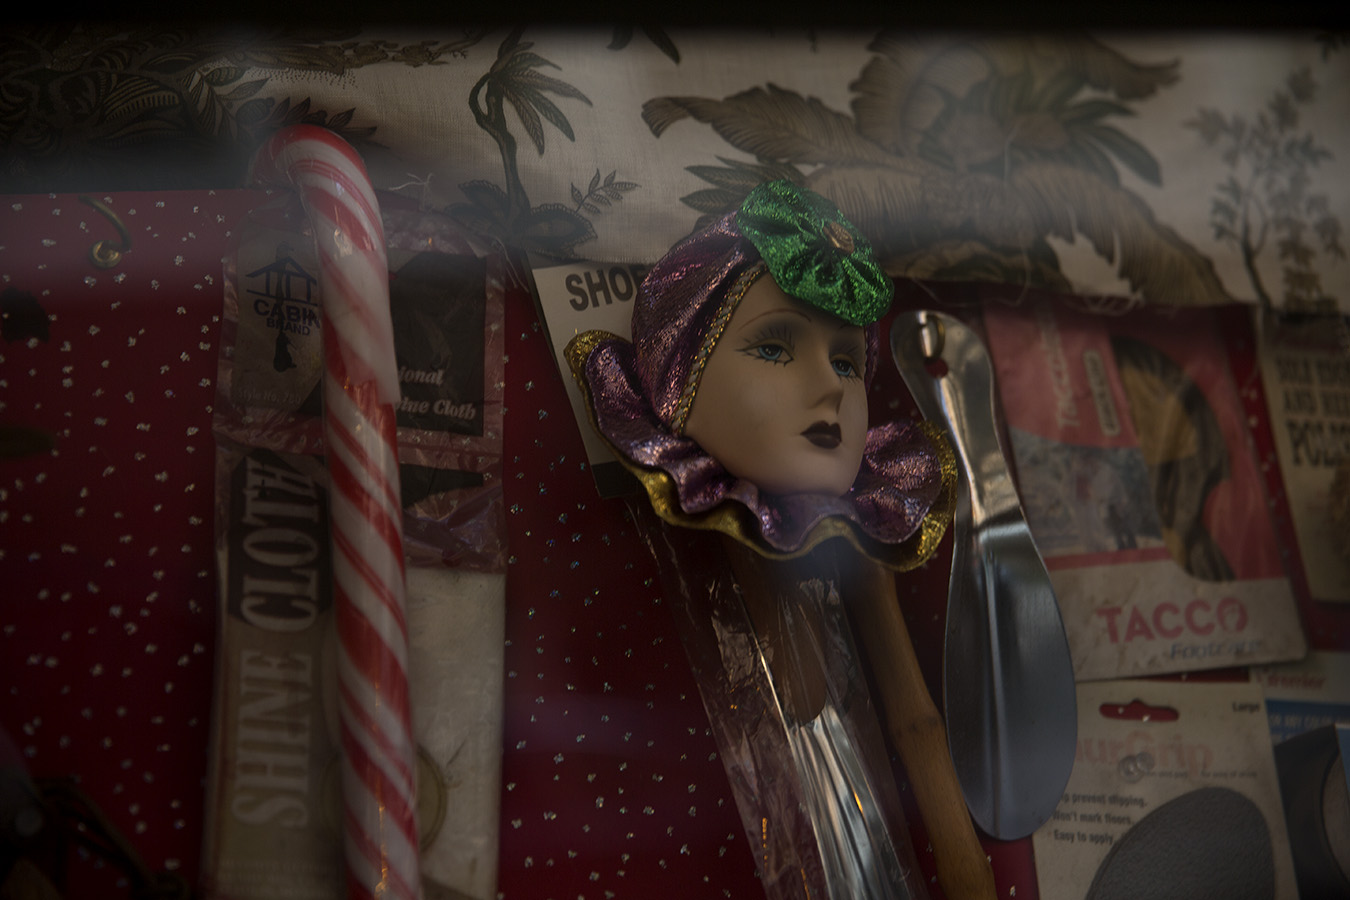 11_Woman in the Window_Casey Egner_Street Photography_Ornament_Close up_Window_Doll copy